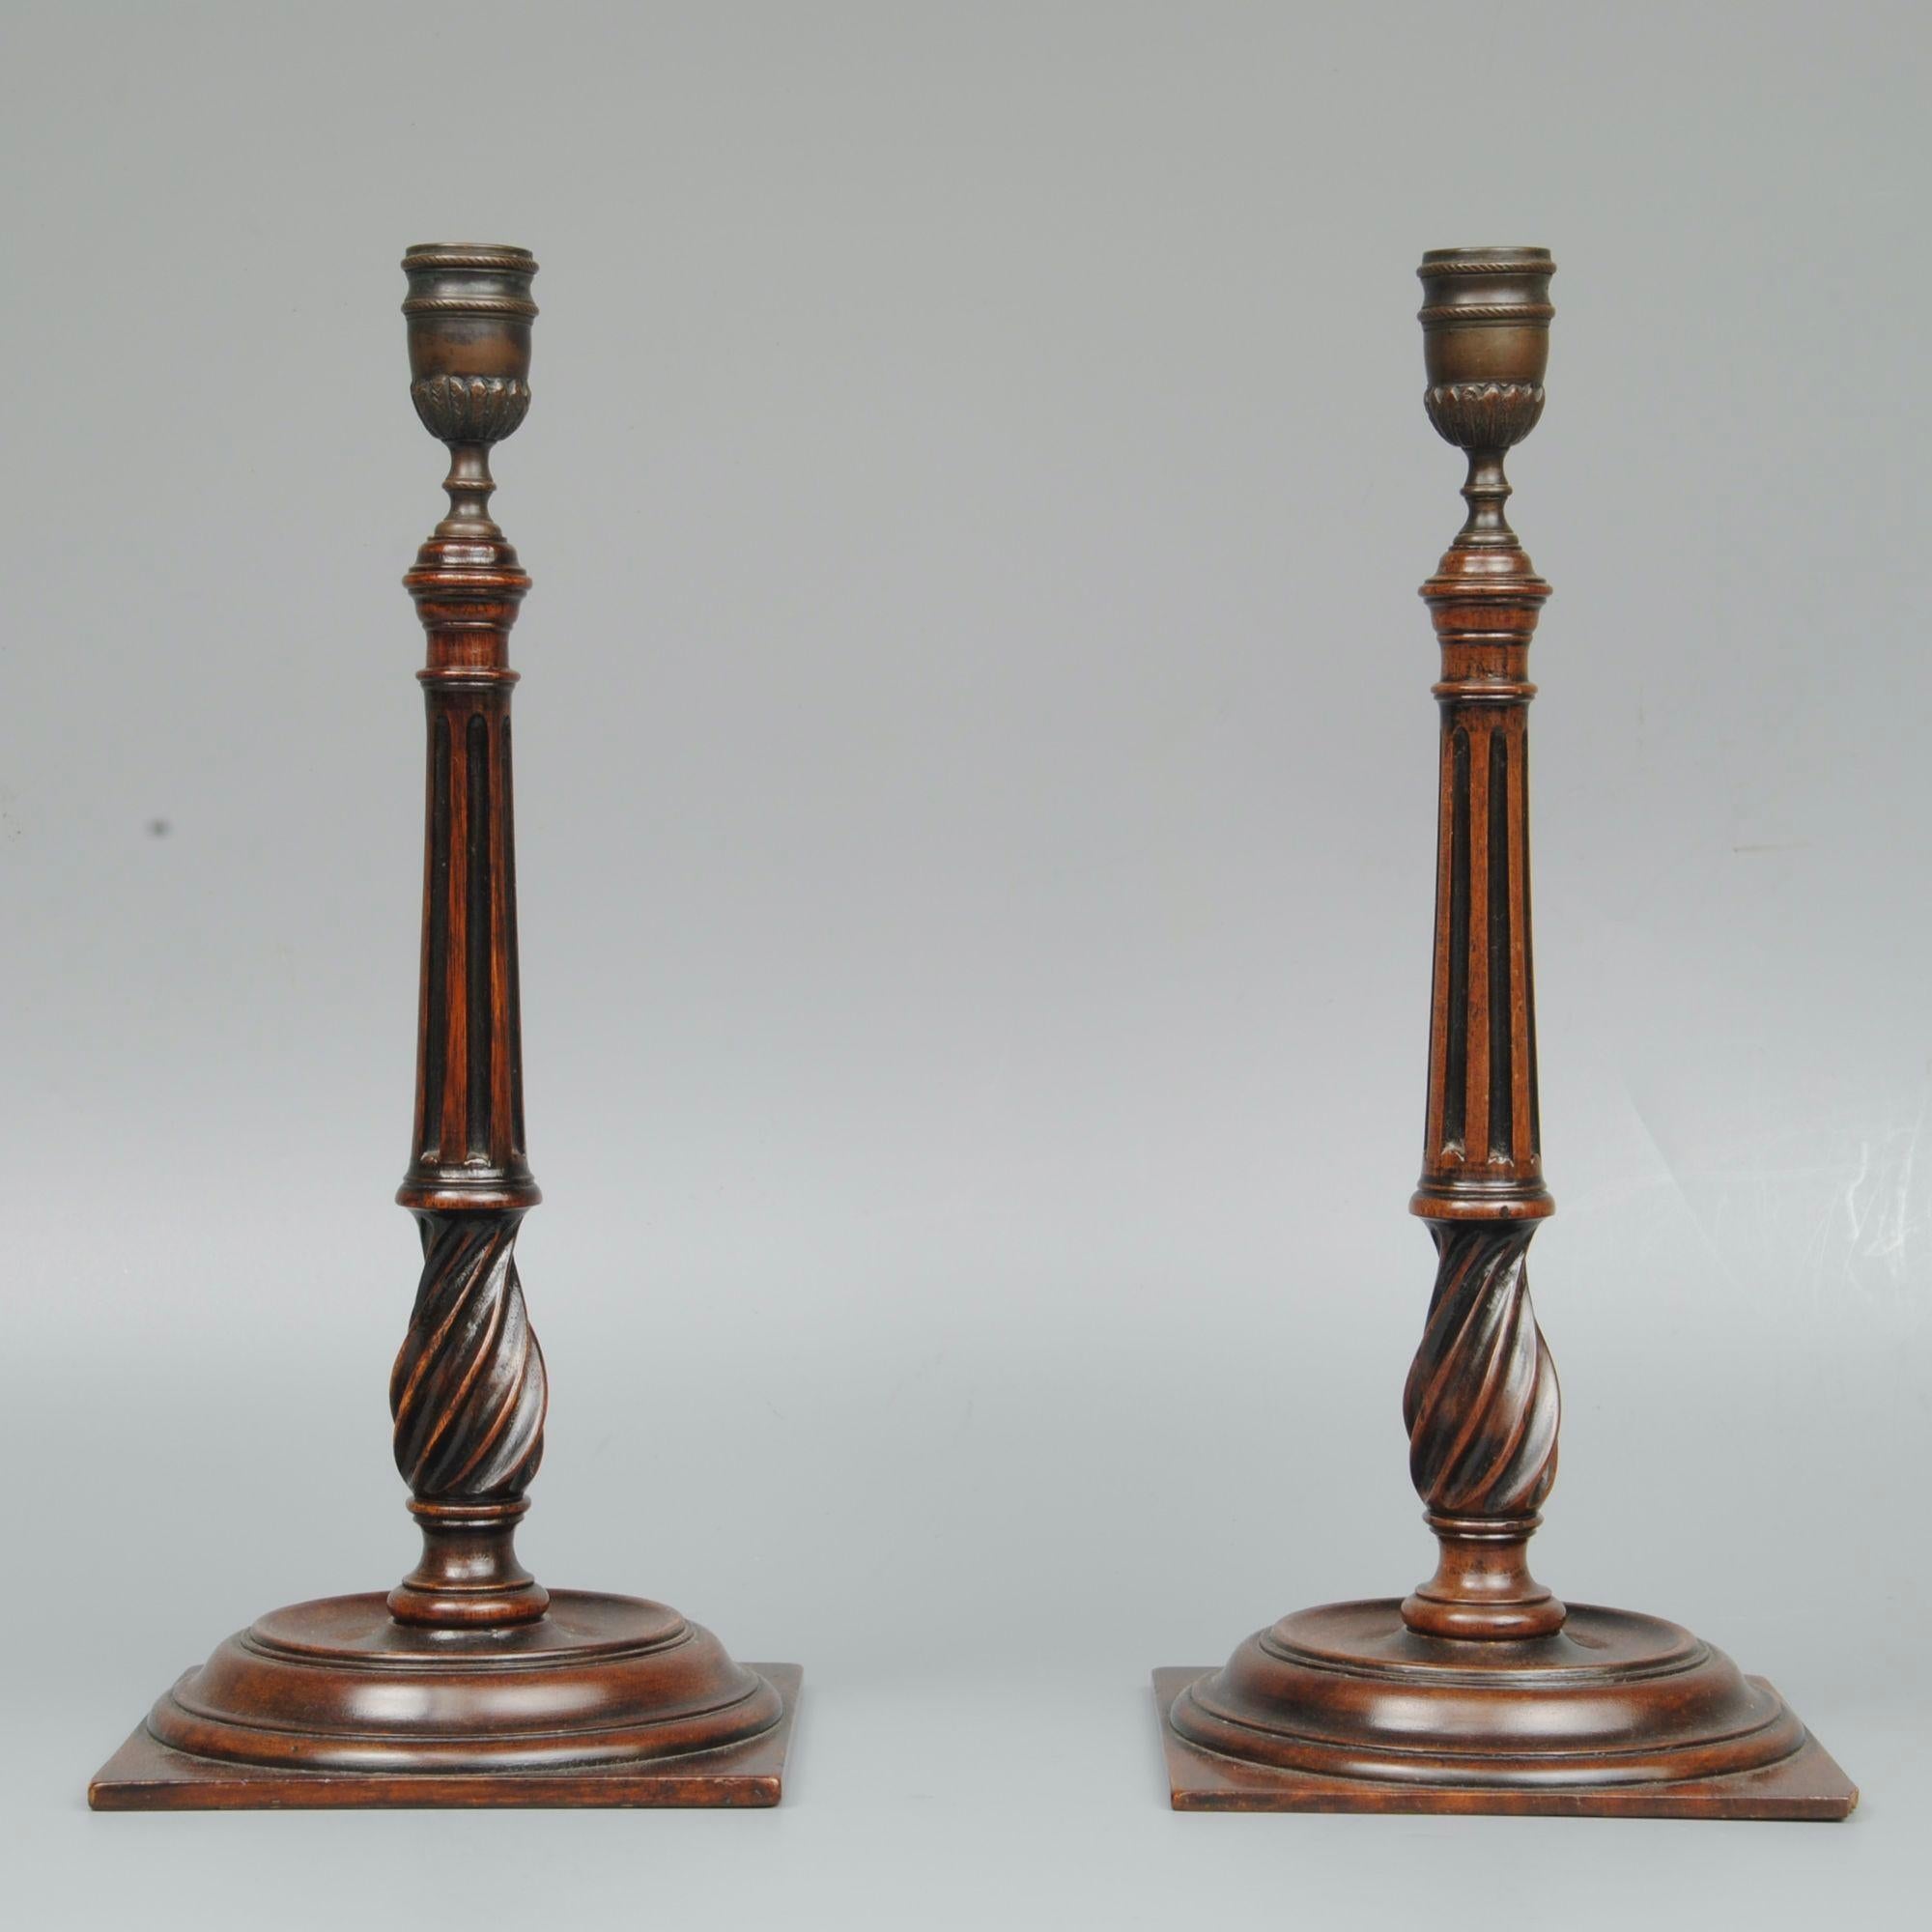 An elegant pair of mahogany turned and reeded 18th century style candlesticks with brass candle holders.
circa 1870